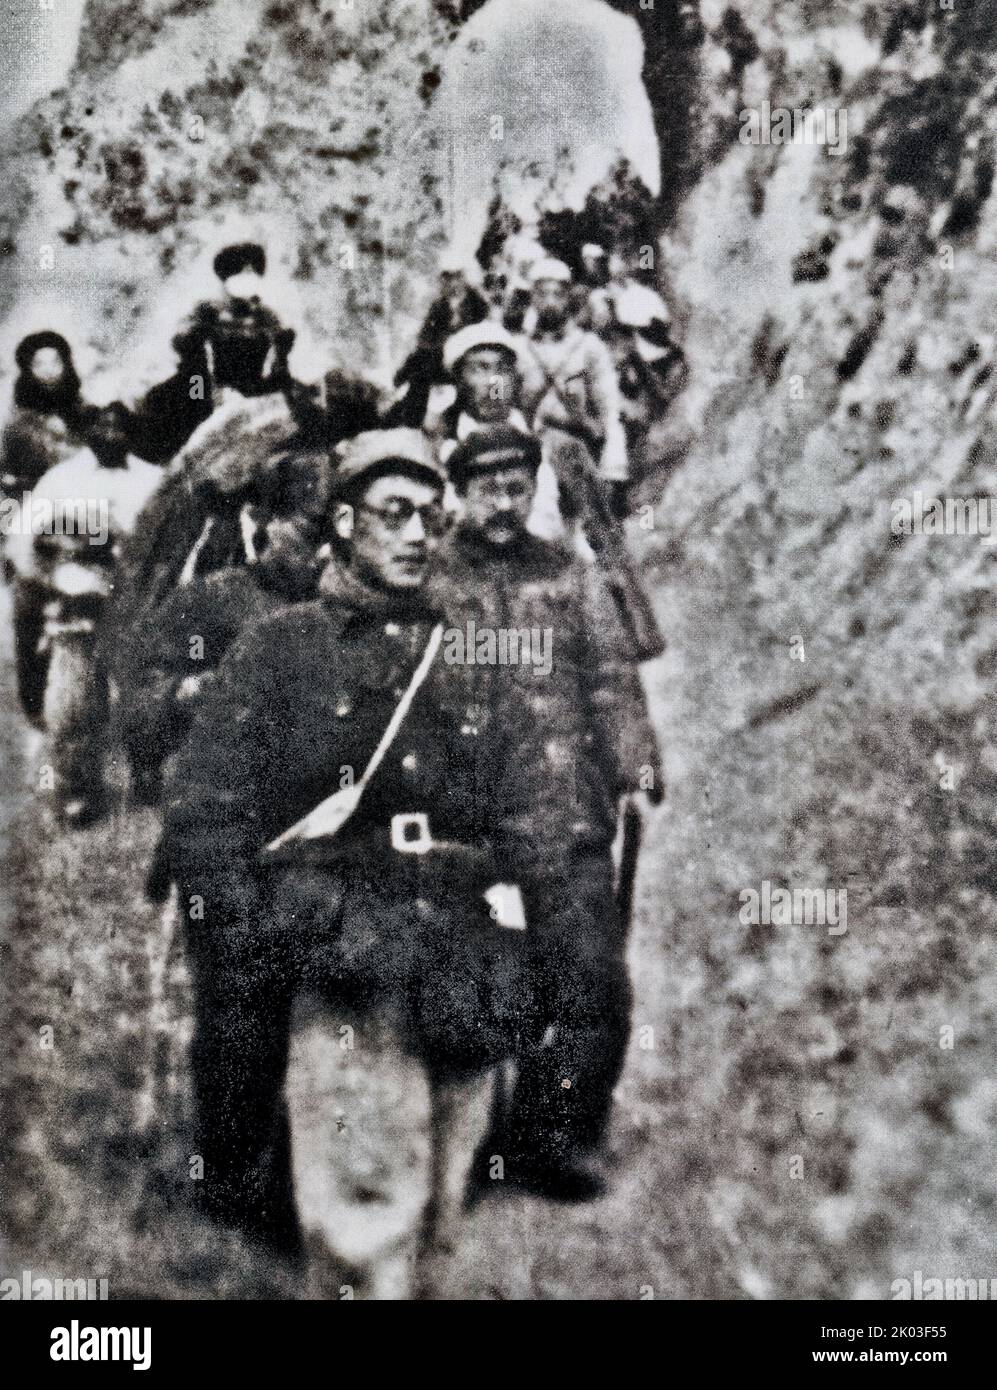 The Long March was a military retreat undertaken by the Red Army of the Communist Party of China (CPC), the forerunner of the People's Liberation Army, to evade the pursuit of the National Army of the Chinese Nationalist Party, the most famous began in the Jiangxi (Jiangxi) province in October 1934 and ended in the Shaanxi province in October 1935. Stock Photo